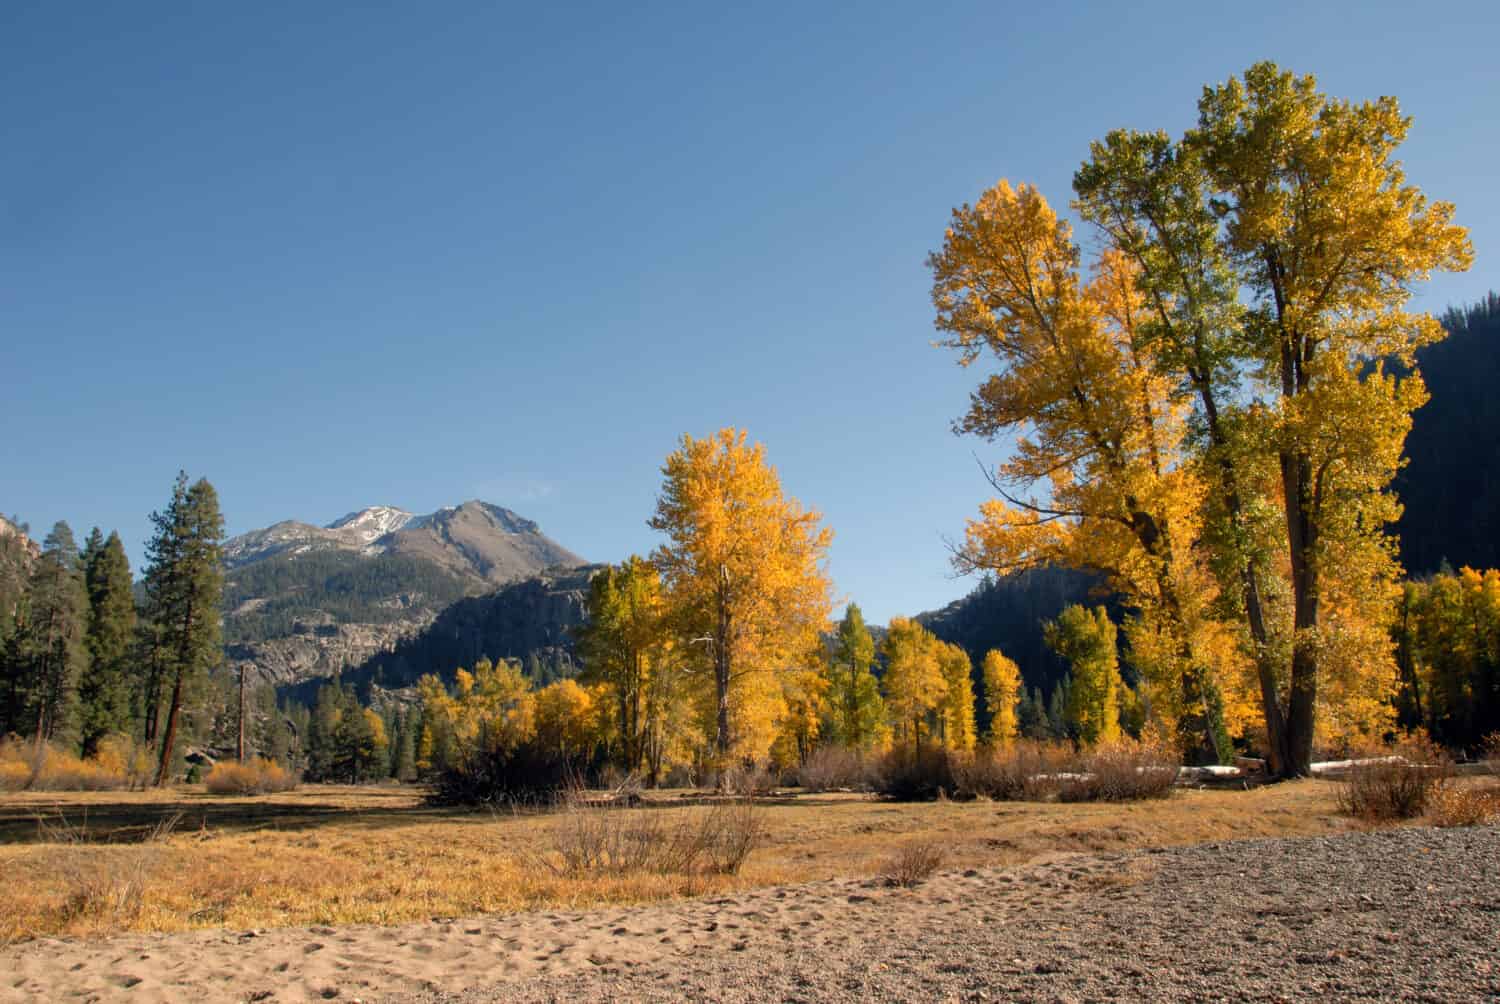 Dust of Snow On Mountain Peak and Western Freemont Cottonwood Trees in Autumn Color, Kennedy Meadows, Sierra Nevada